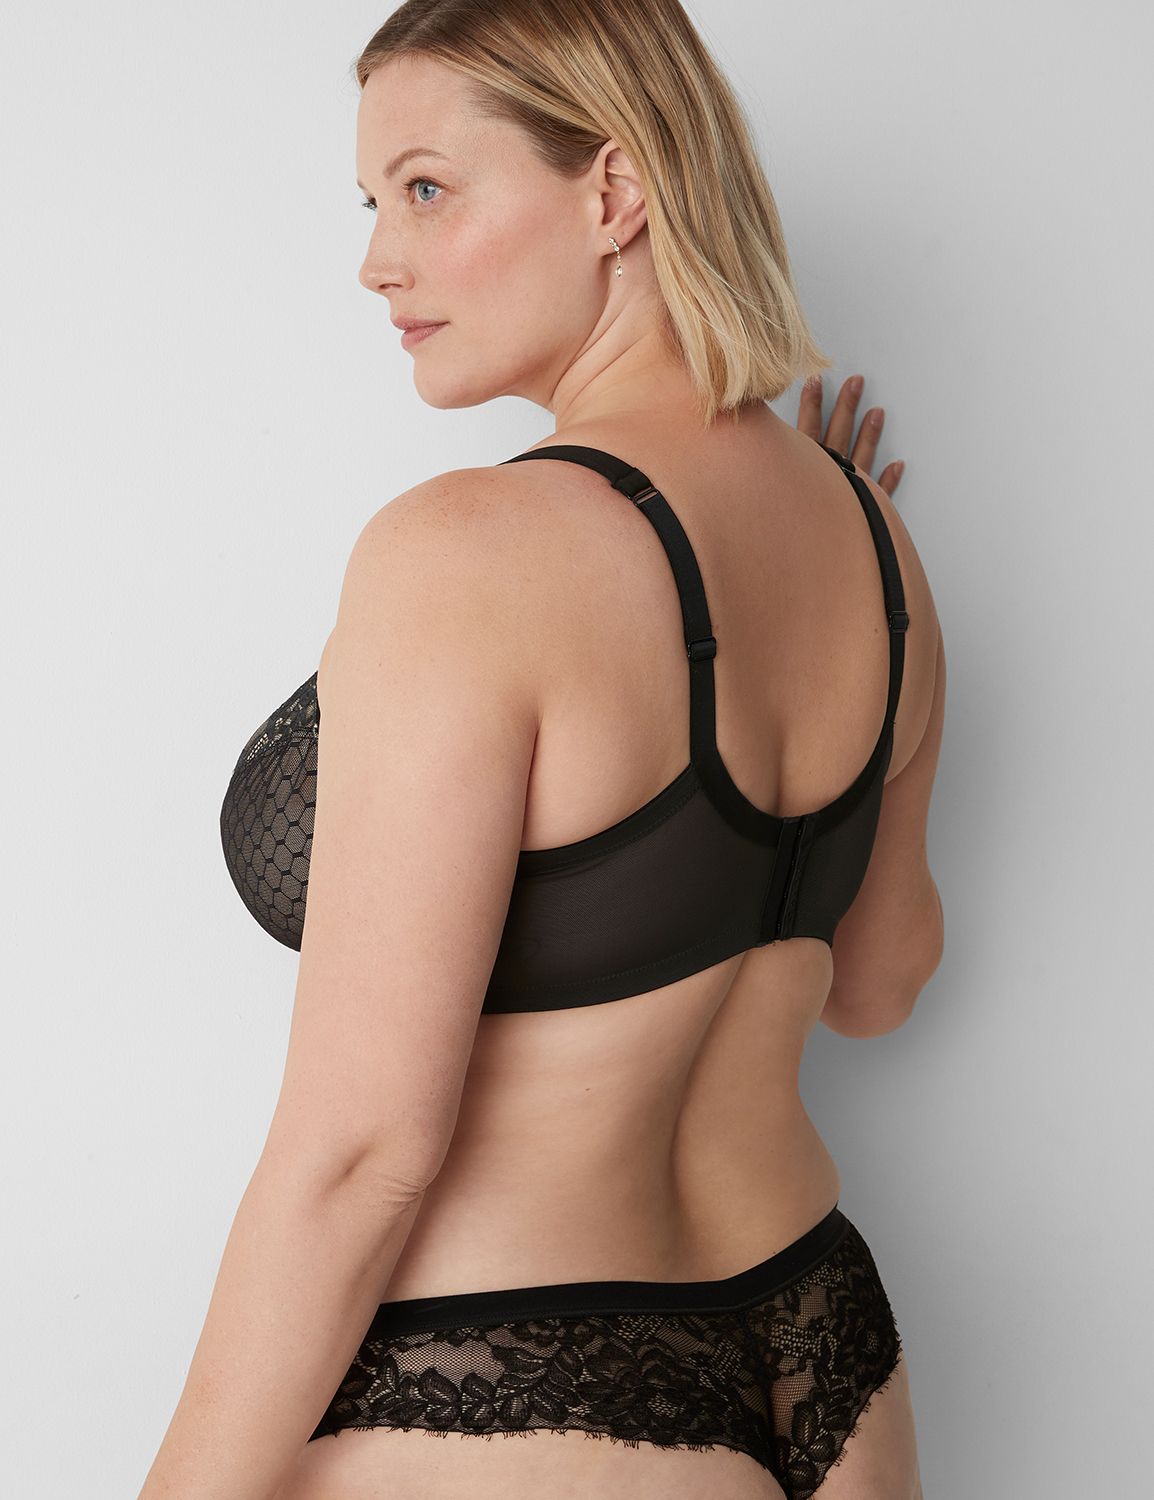 Unlined Lace Bra, G & H Cups